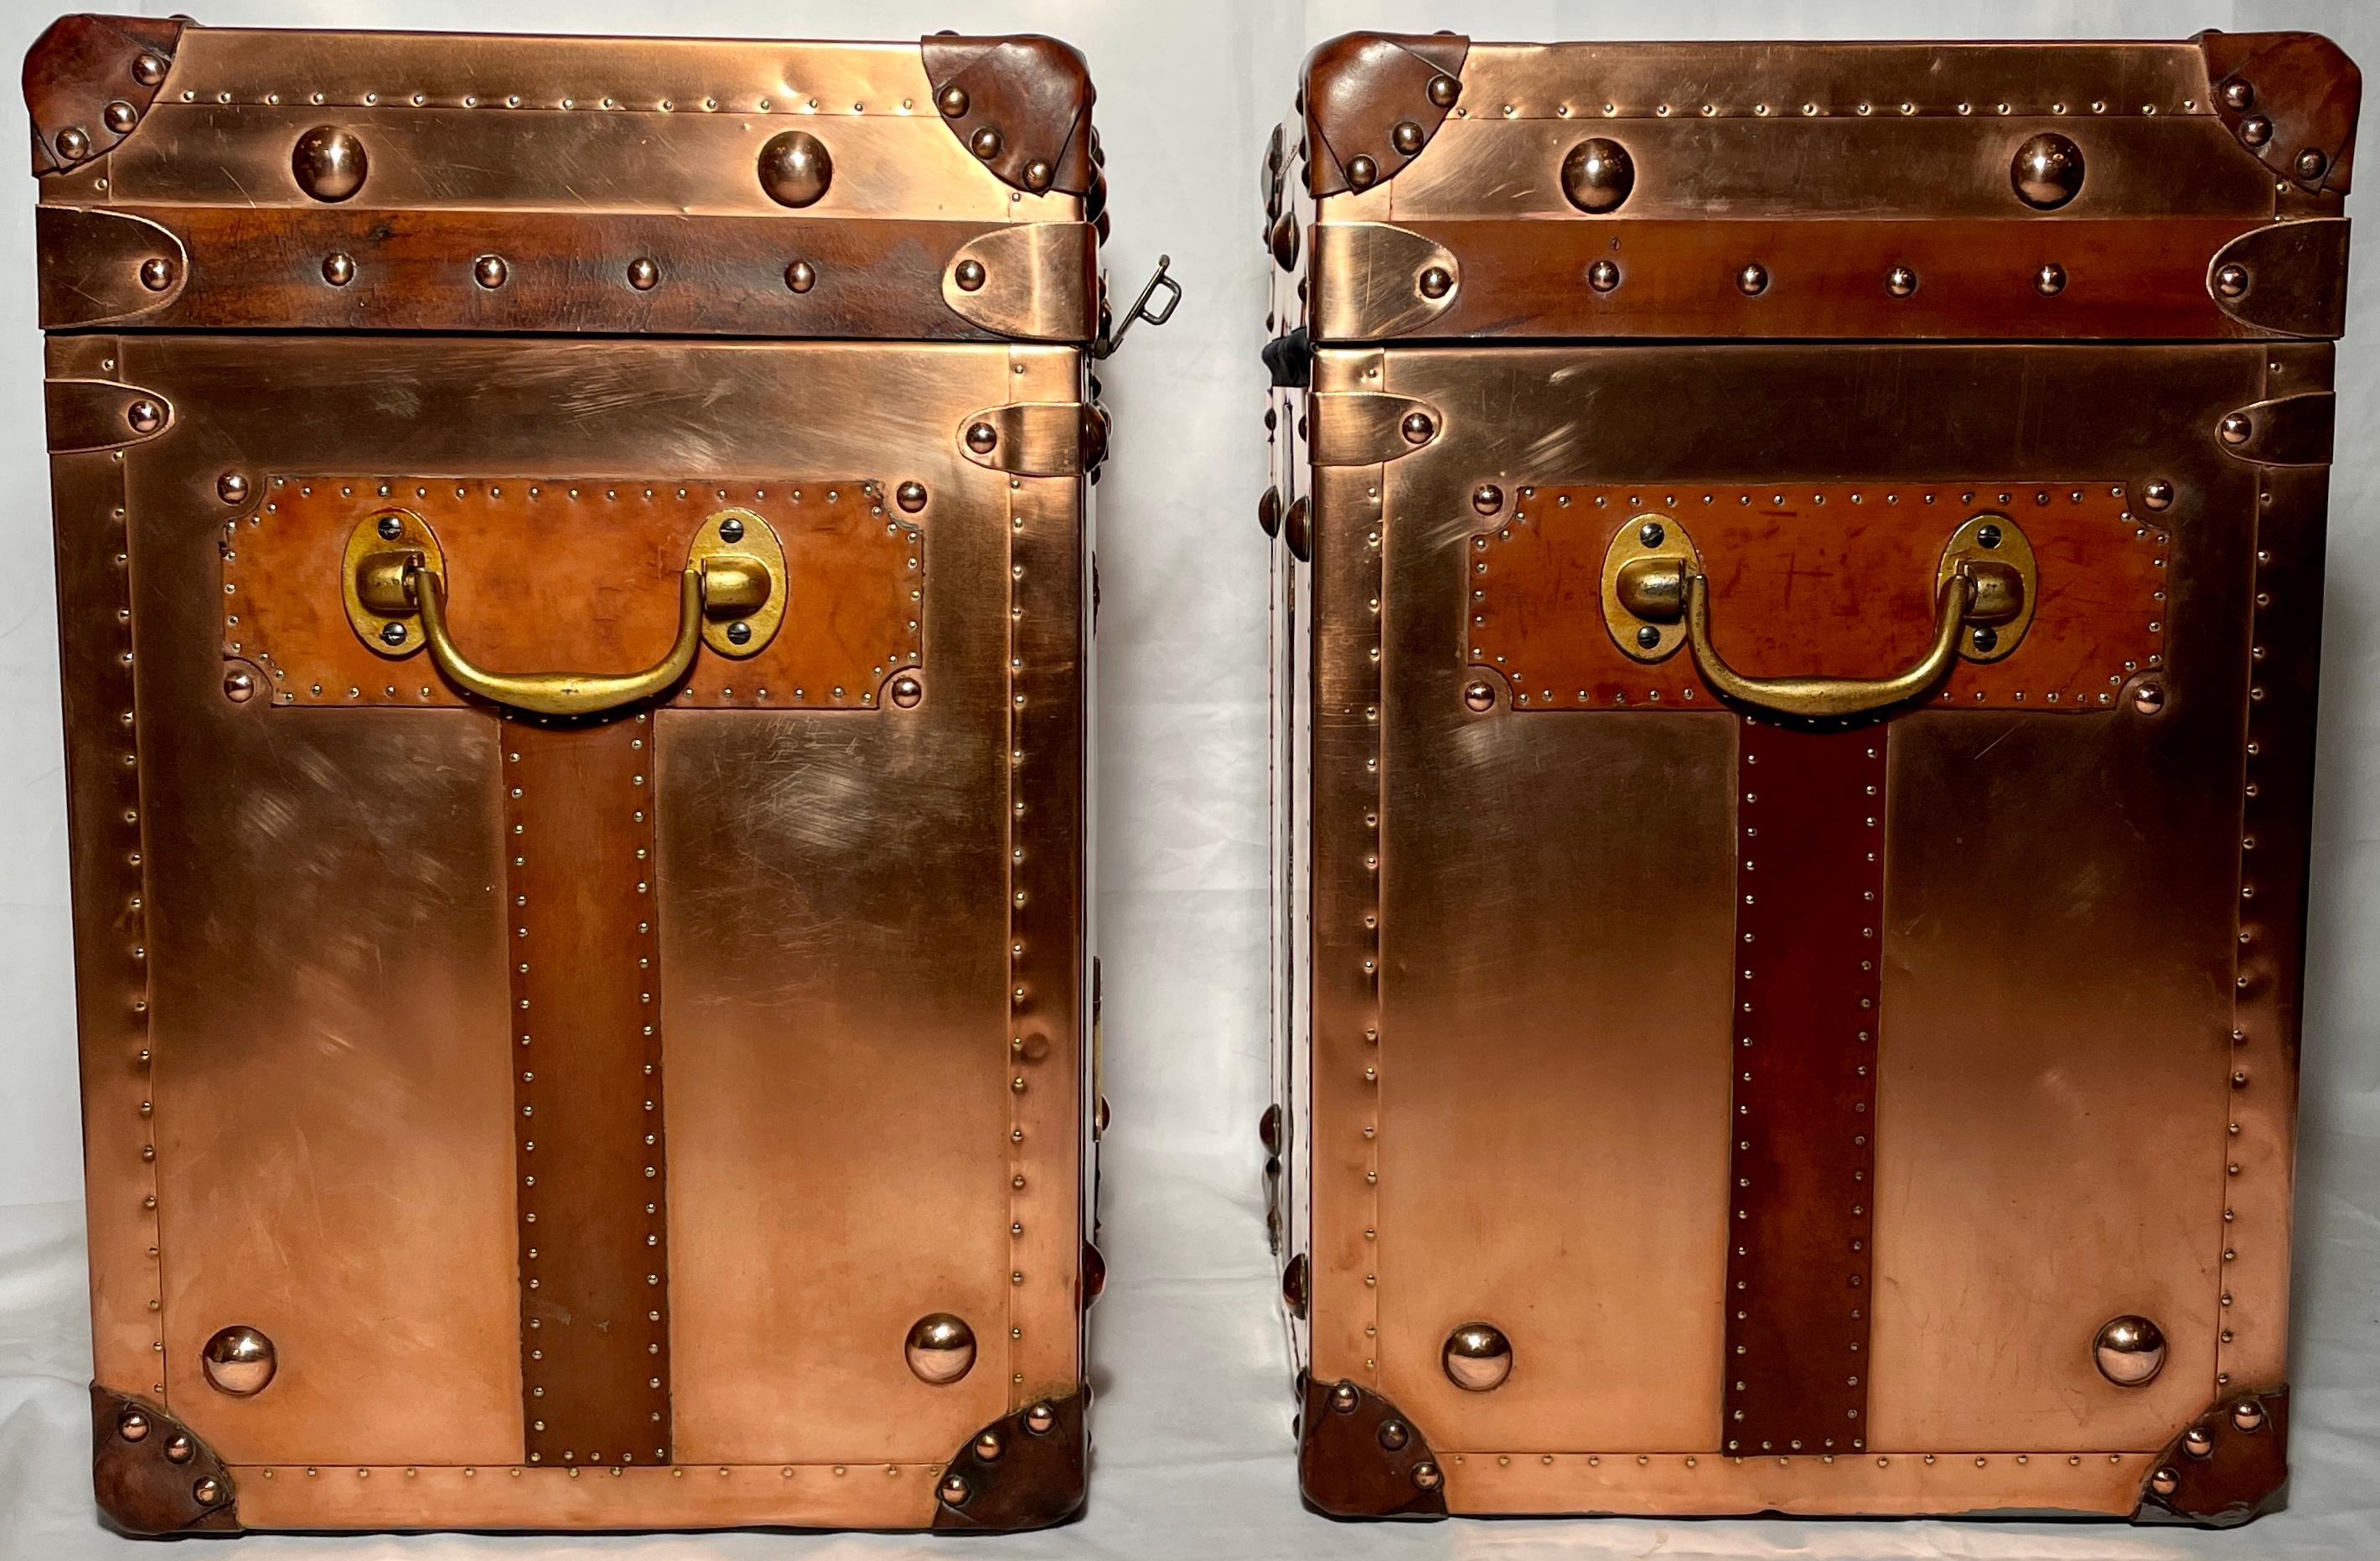 English Pair Antique British Copper & Leather Trunks w/ Royal Corps of Marines Insignia